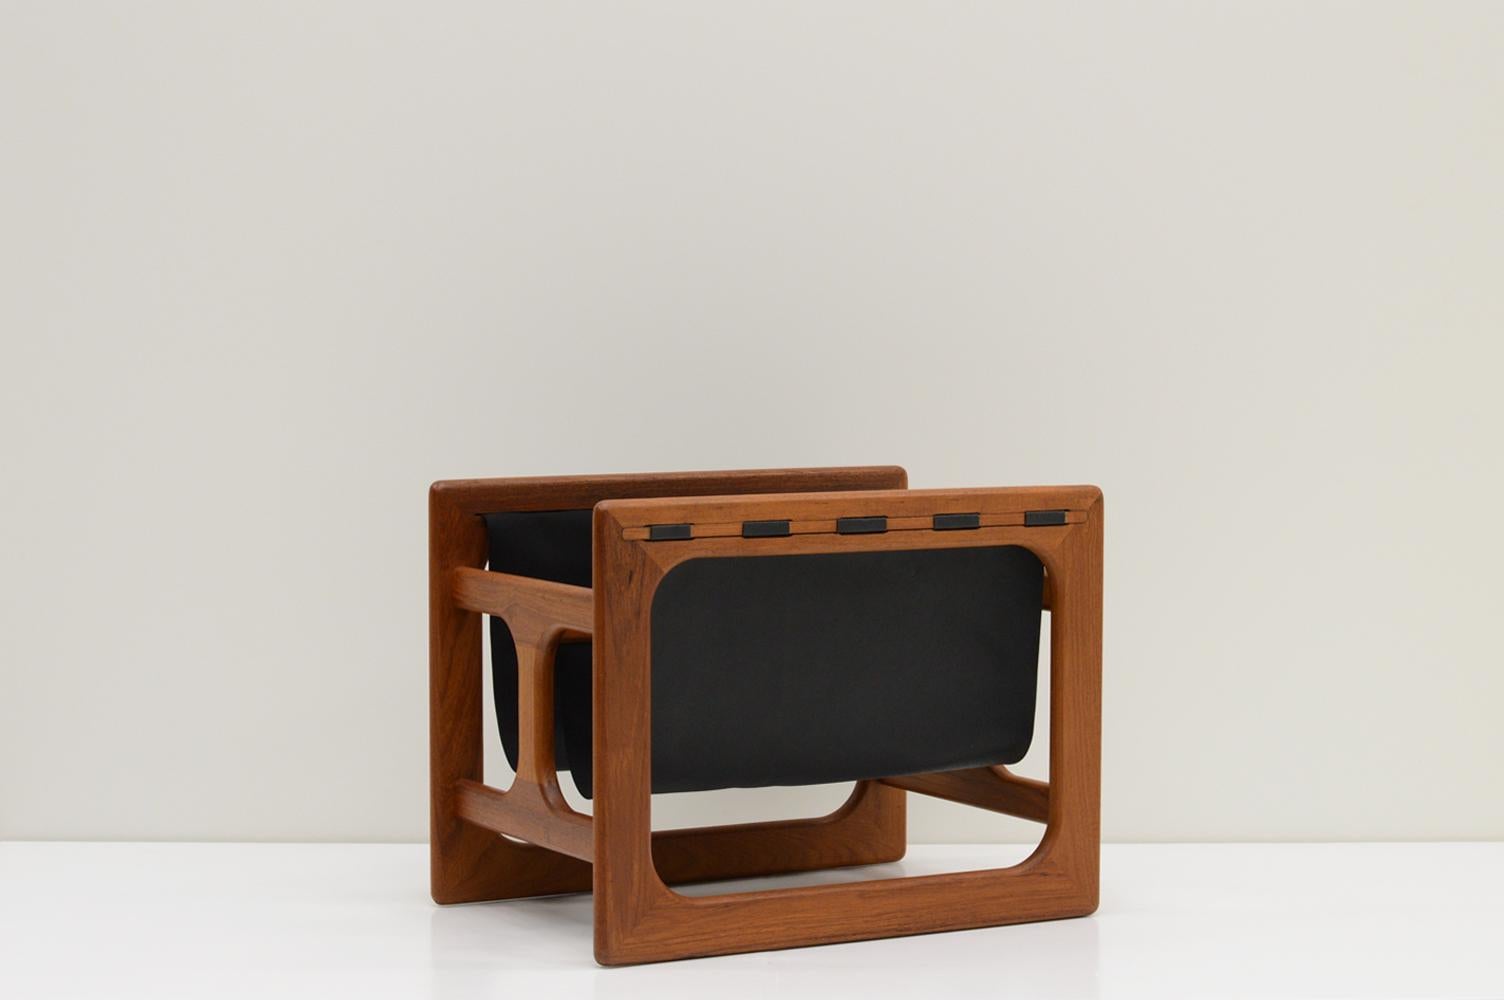 Magazine rack by Salin Møbler, Denmark 60s. Teak frame and black faux leather inlay. This is the double version. Reupholstered and in very good vintage condition. 

Request a quote for the latest shipping rates